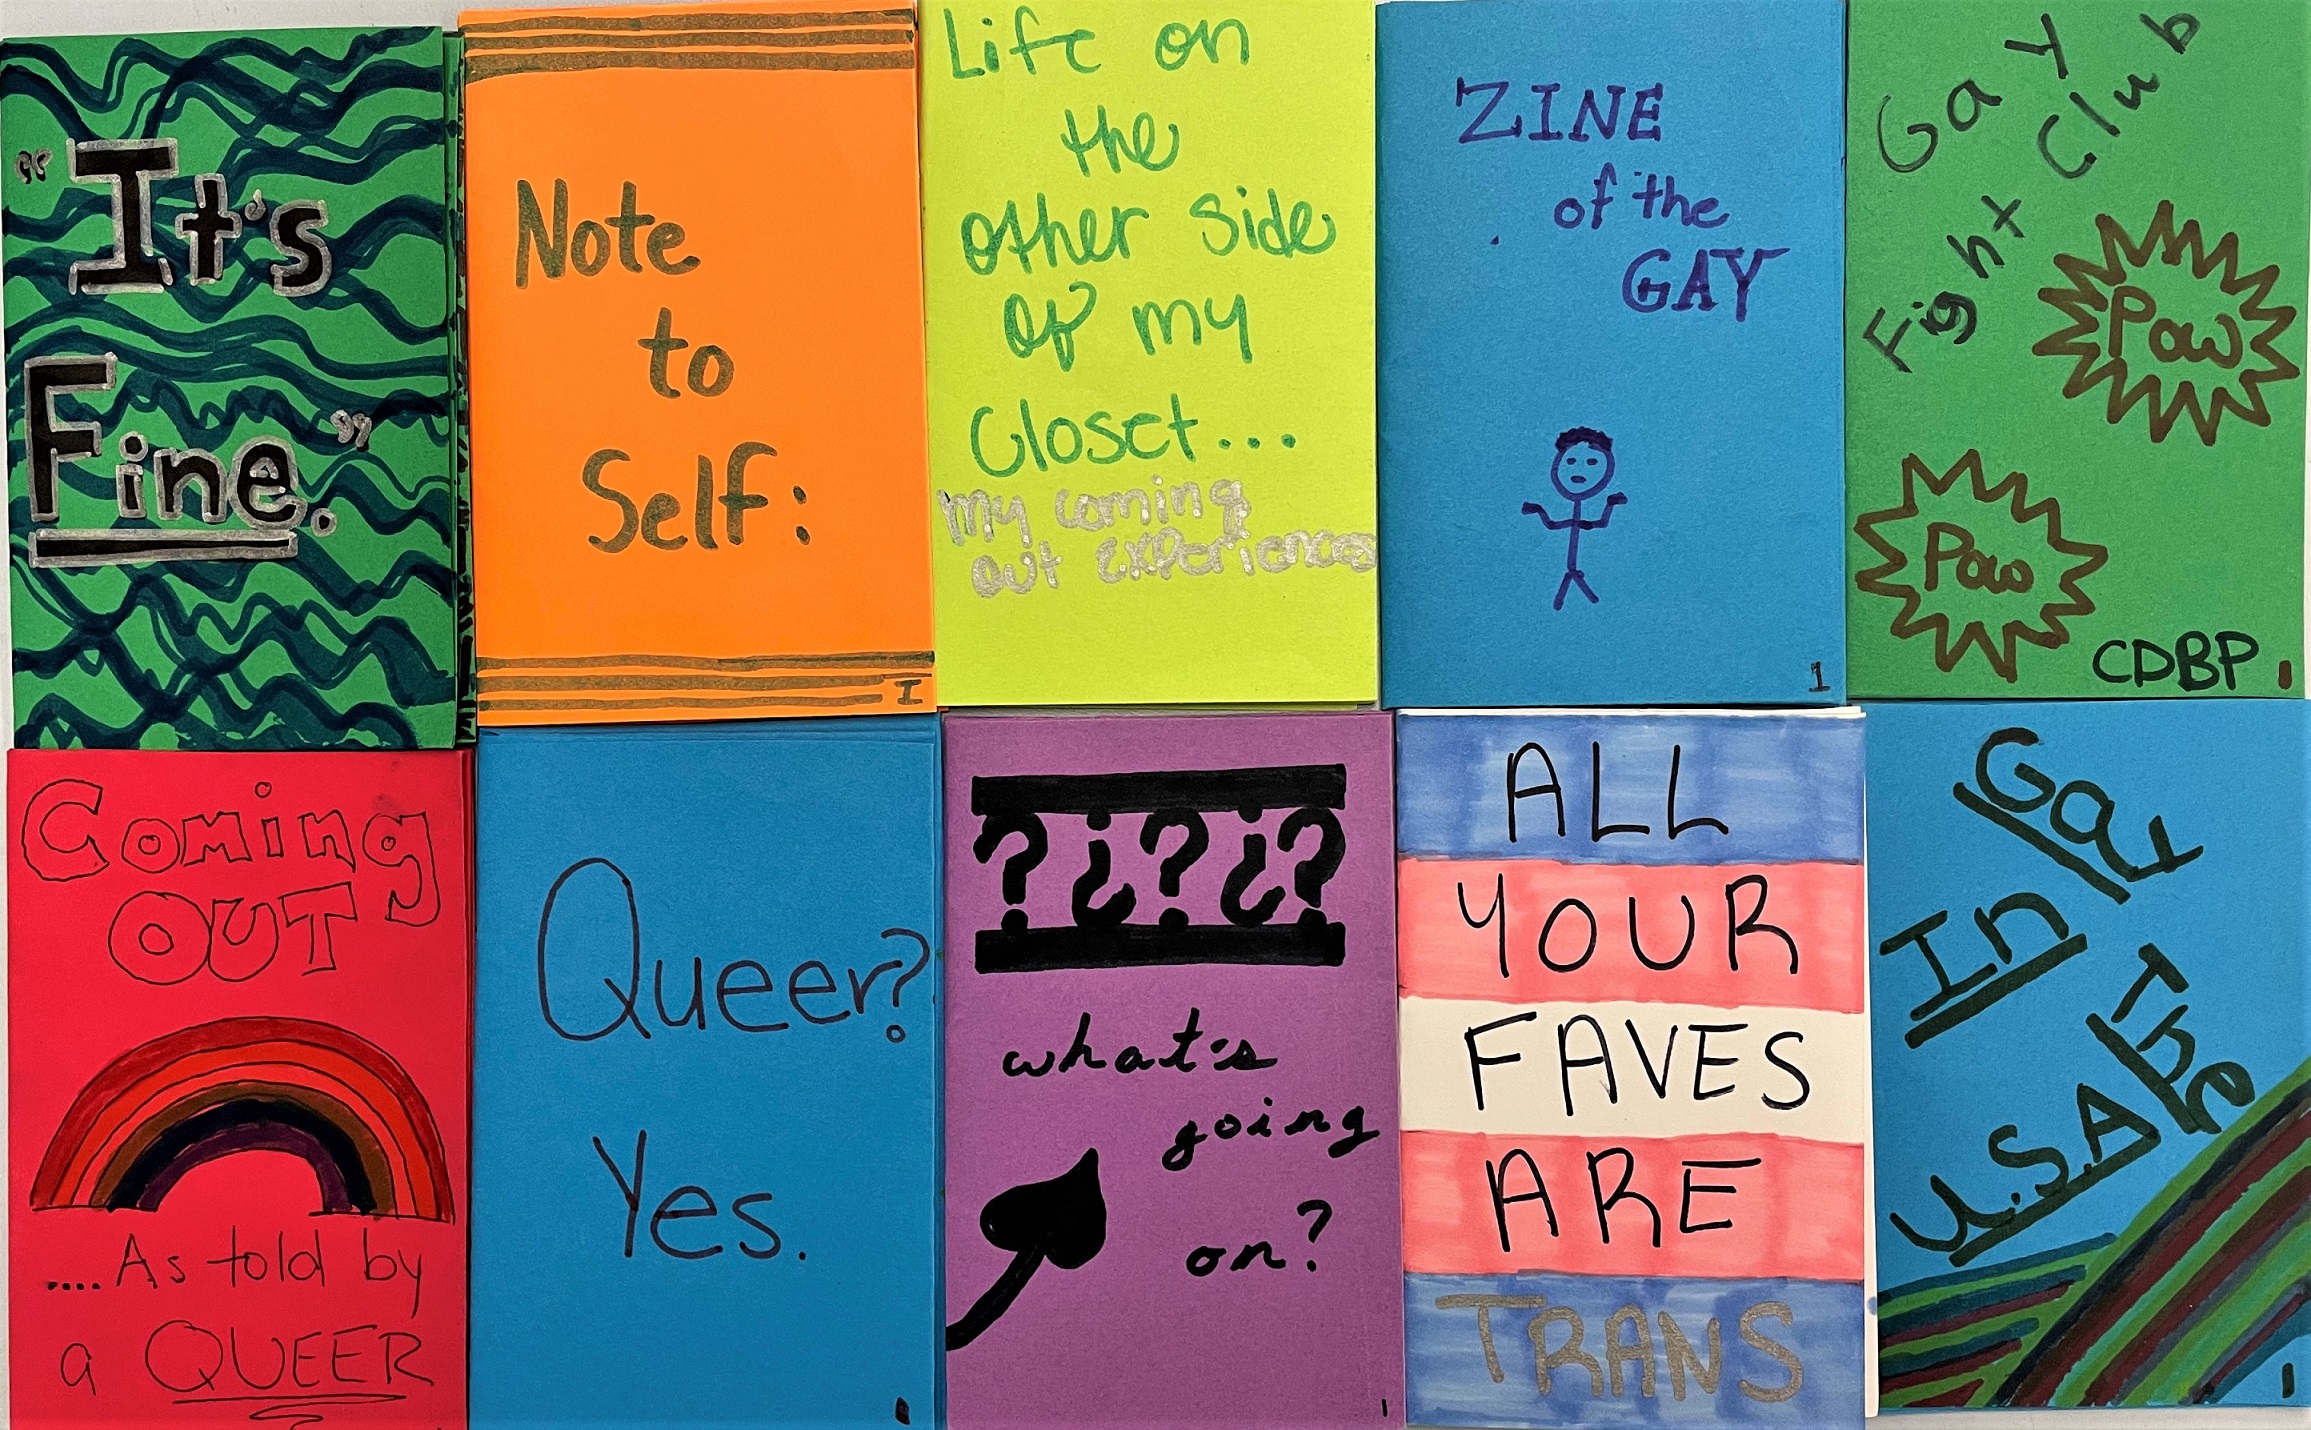 Zines created by students as part of an activity at the GLBT Center on campus